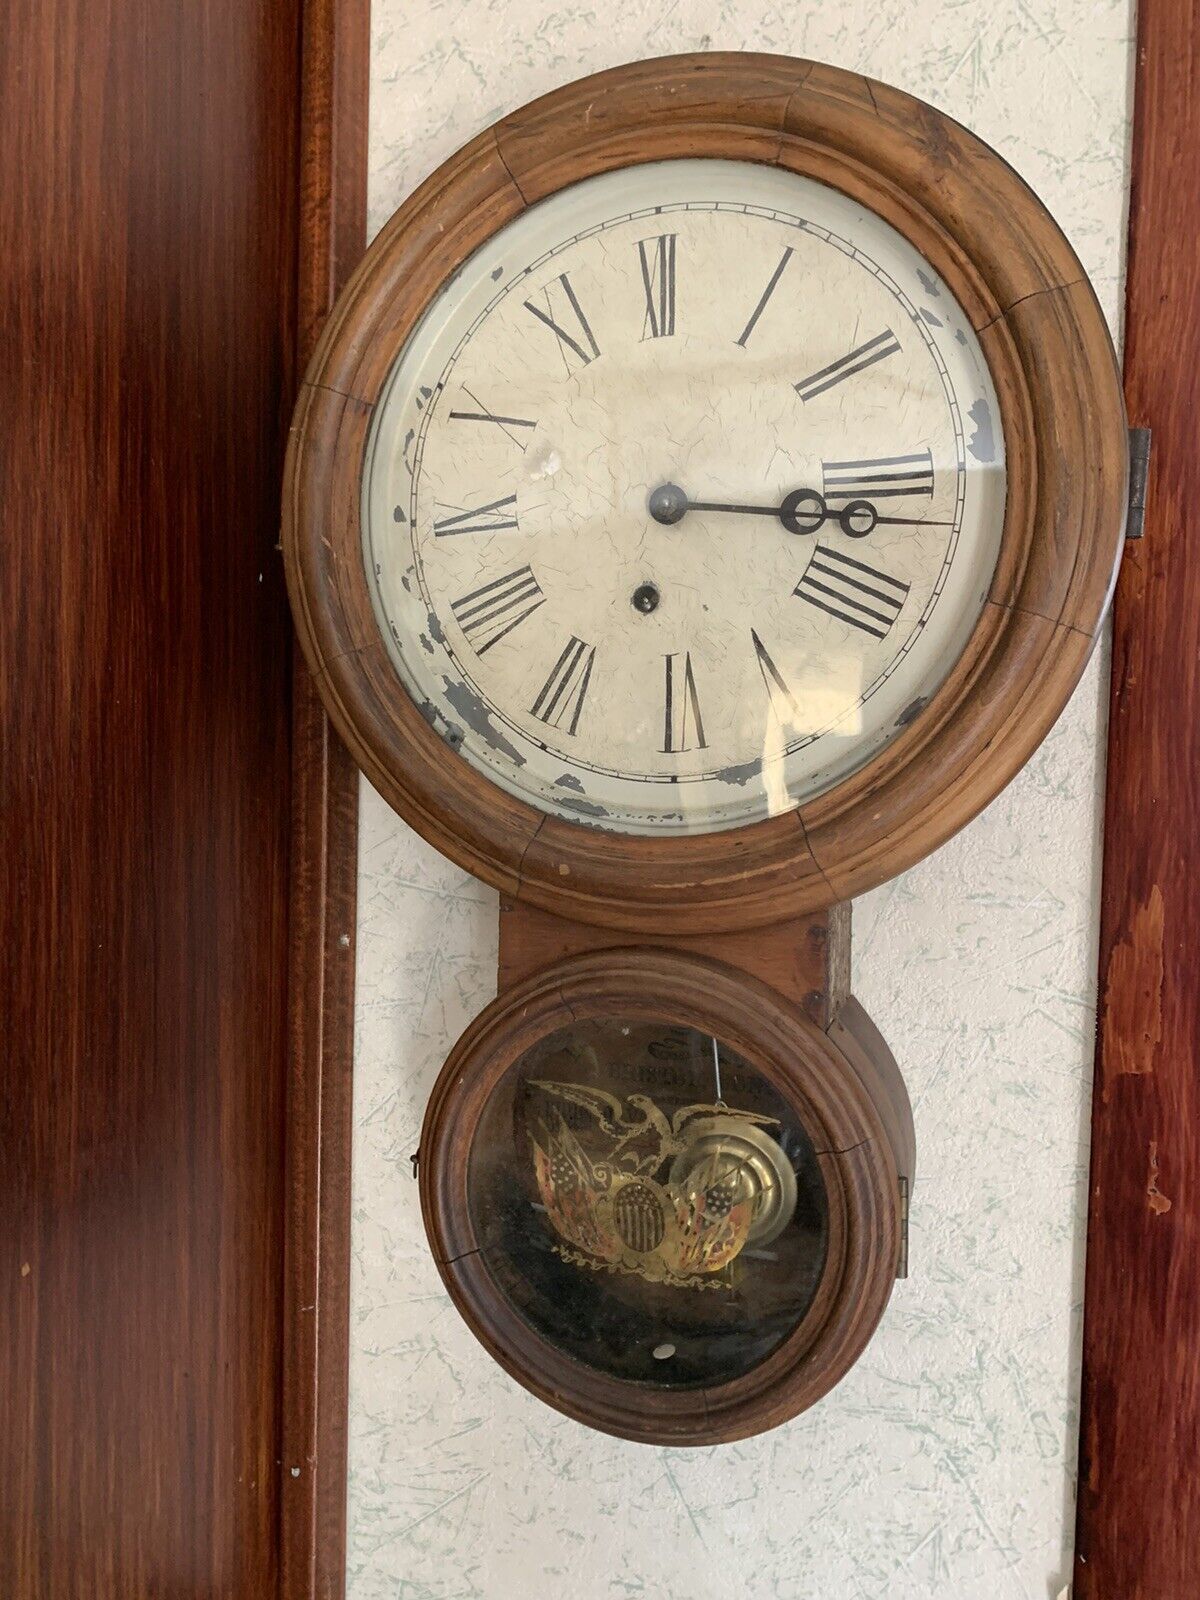 Antique Figure 8 Ingraham Wall Clock Works well